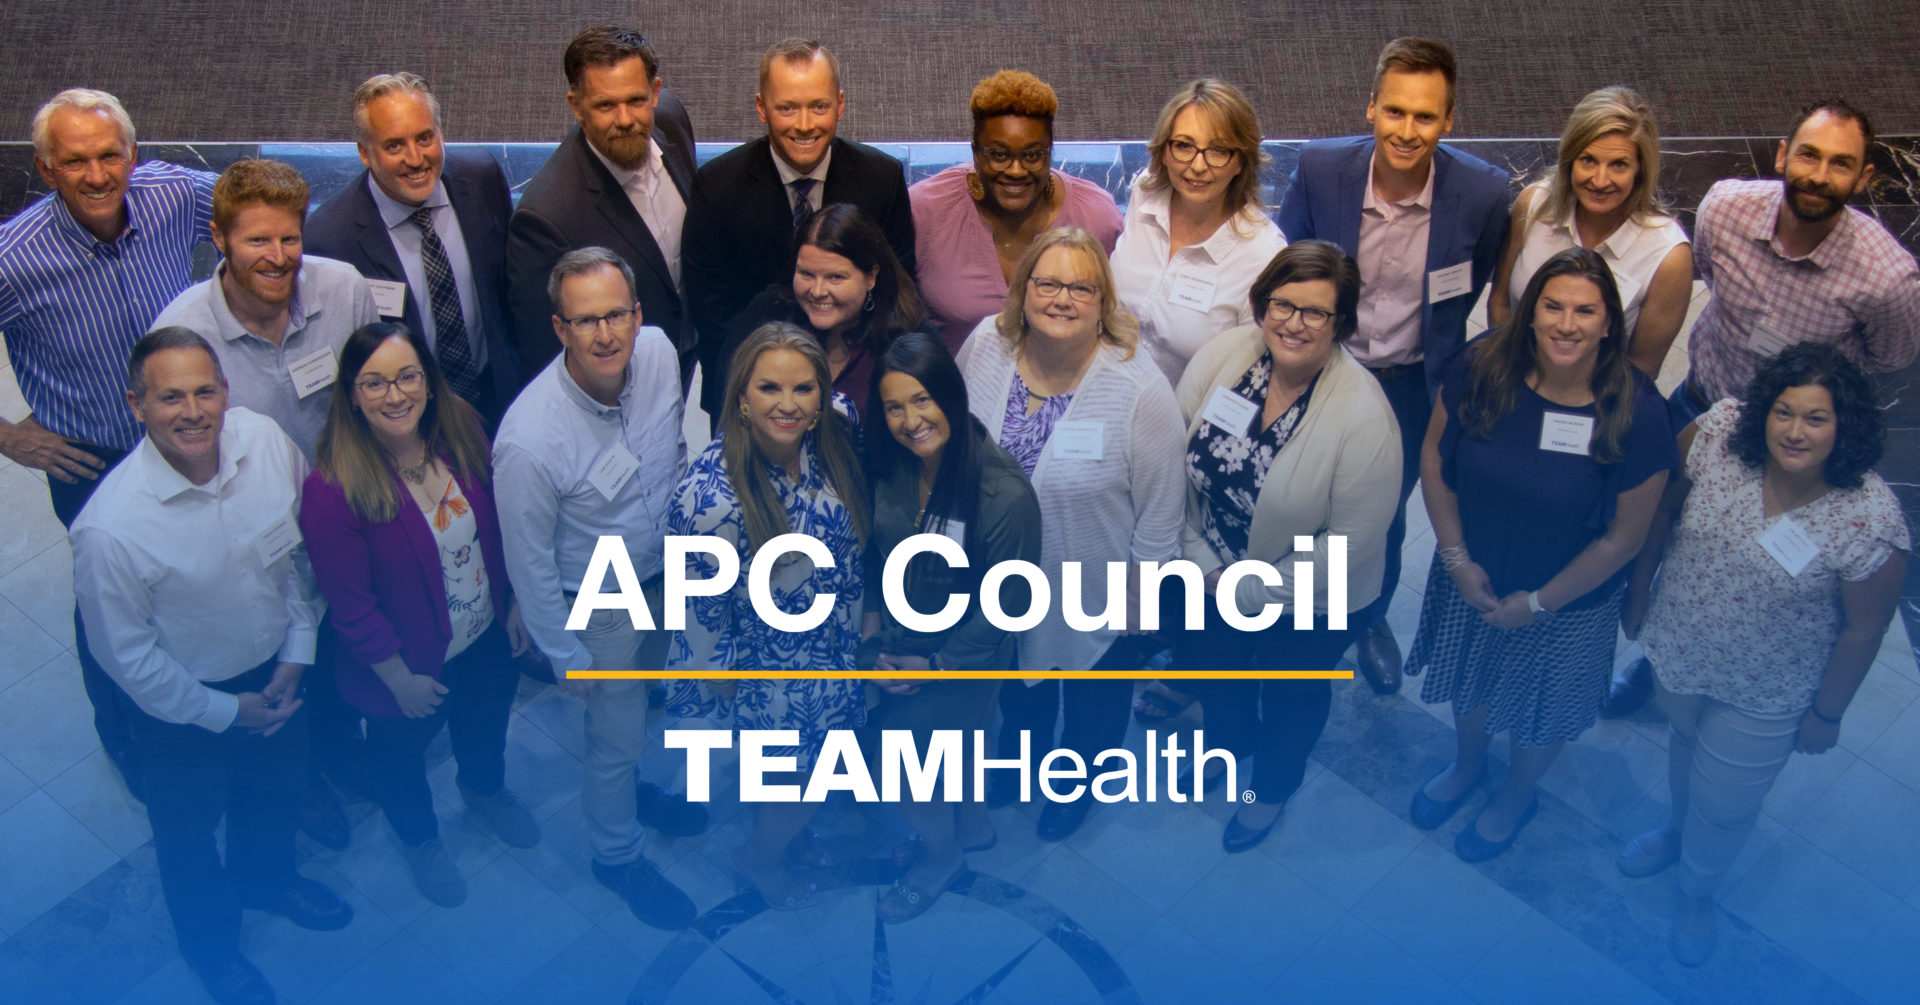 APC Council 2022 Annual Conference TeamHealth